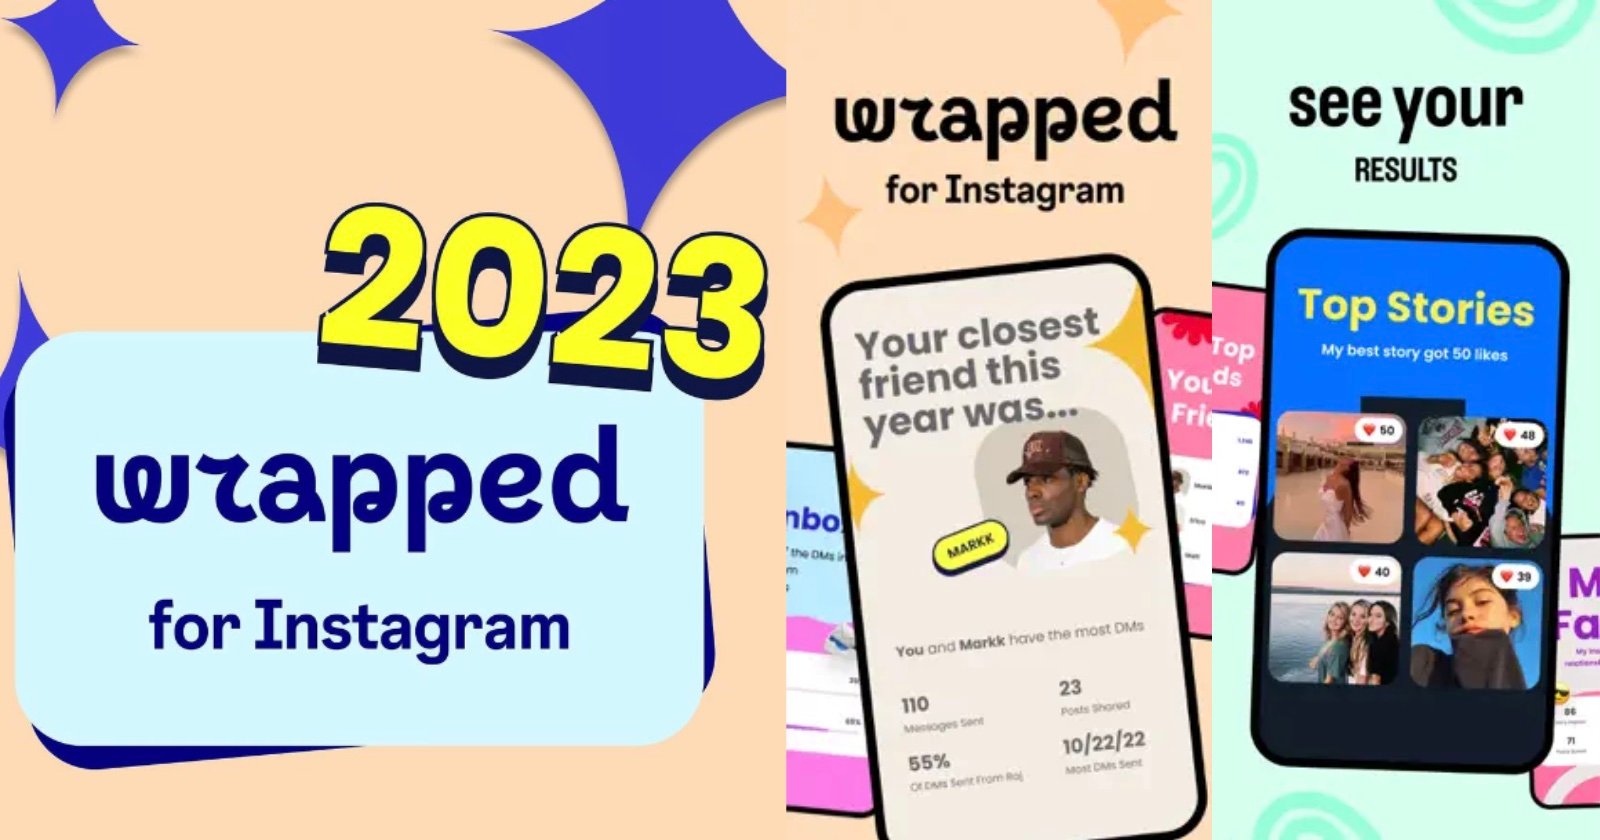  wrapped app says shows instagram users who are 